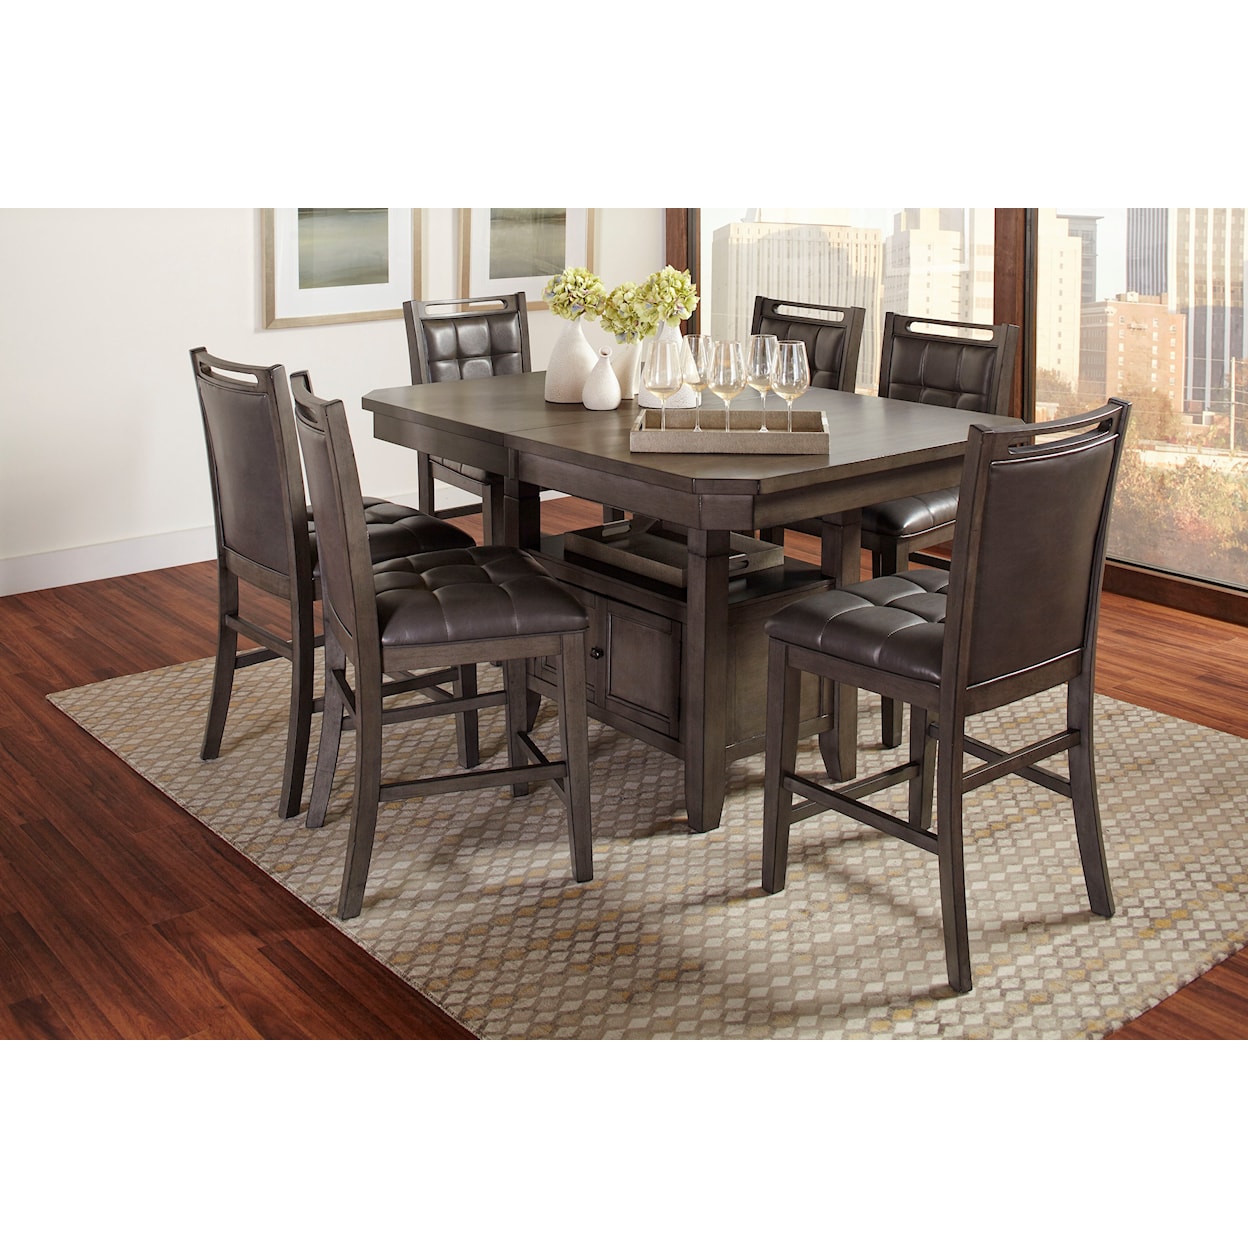 Jofran Manchester 7 Piece Counter Table and Chair Set